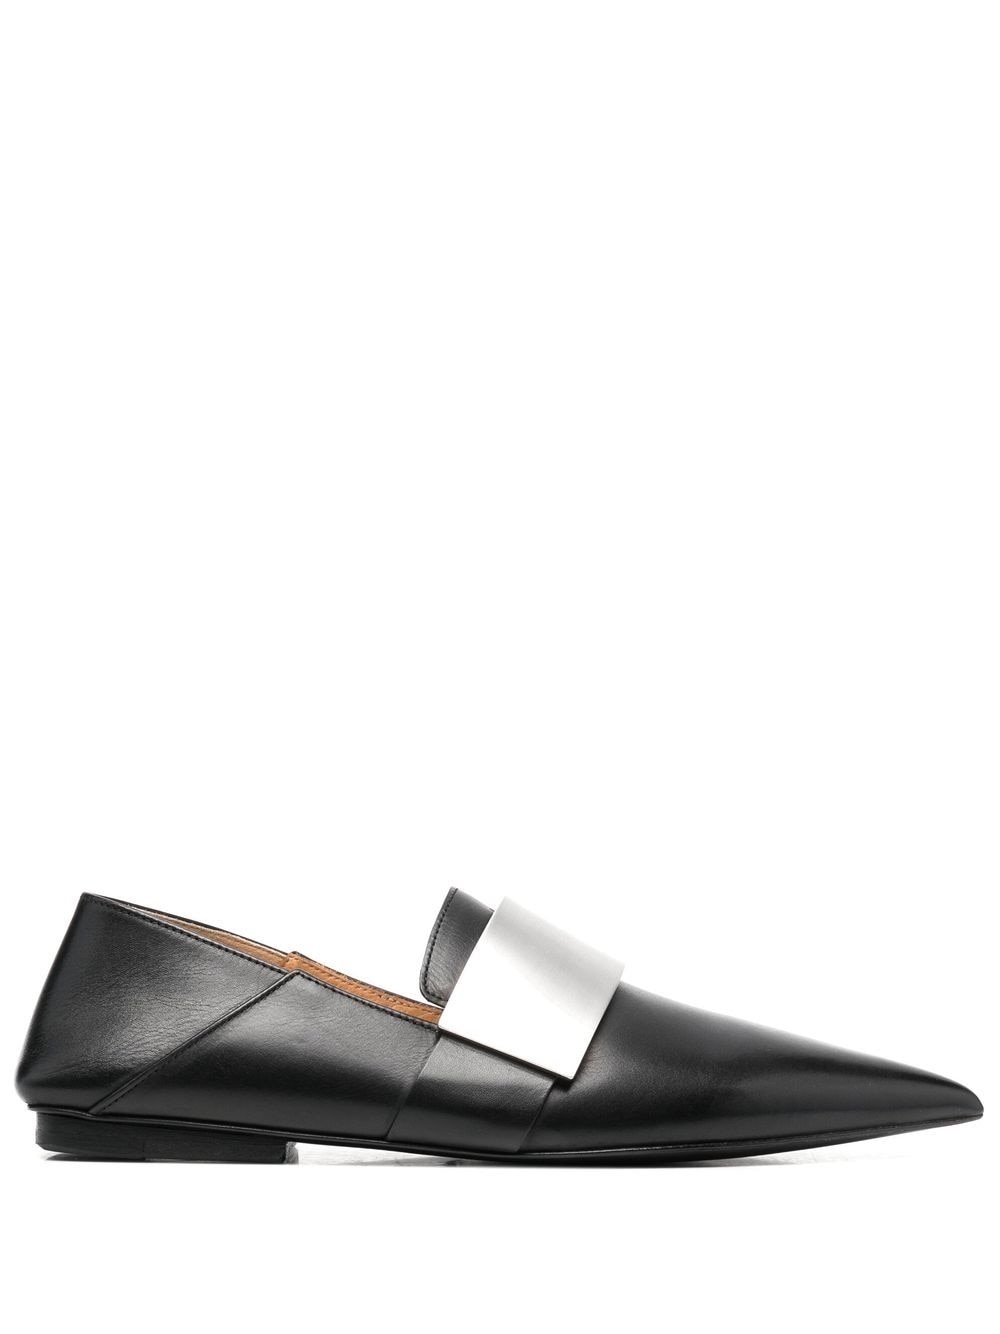 Marsèll pointed toe loafers